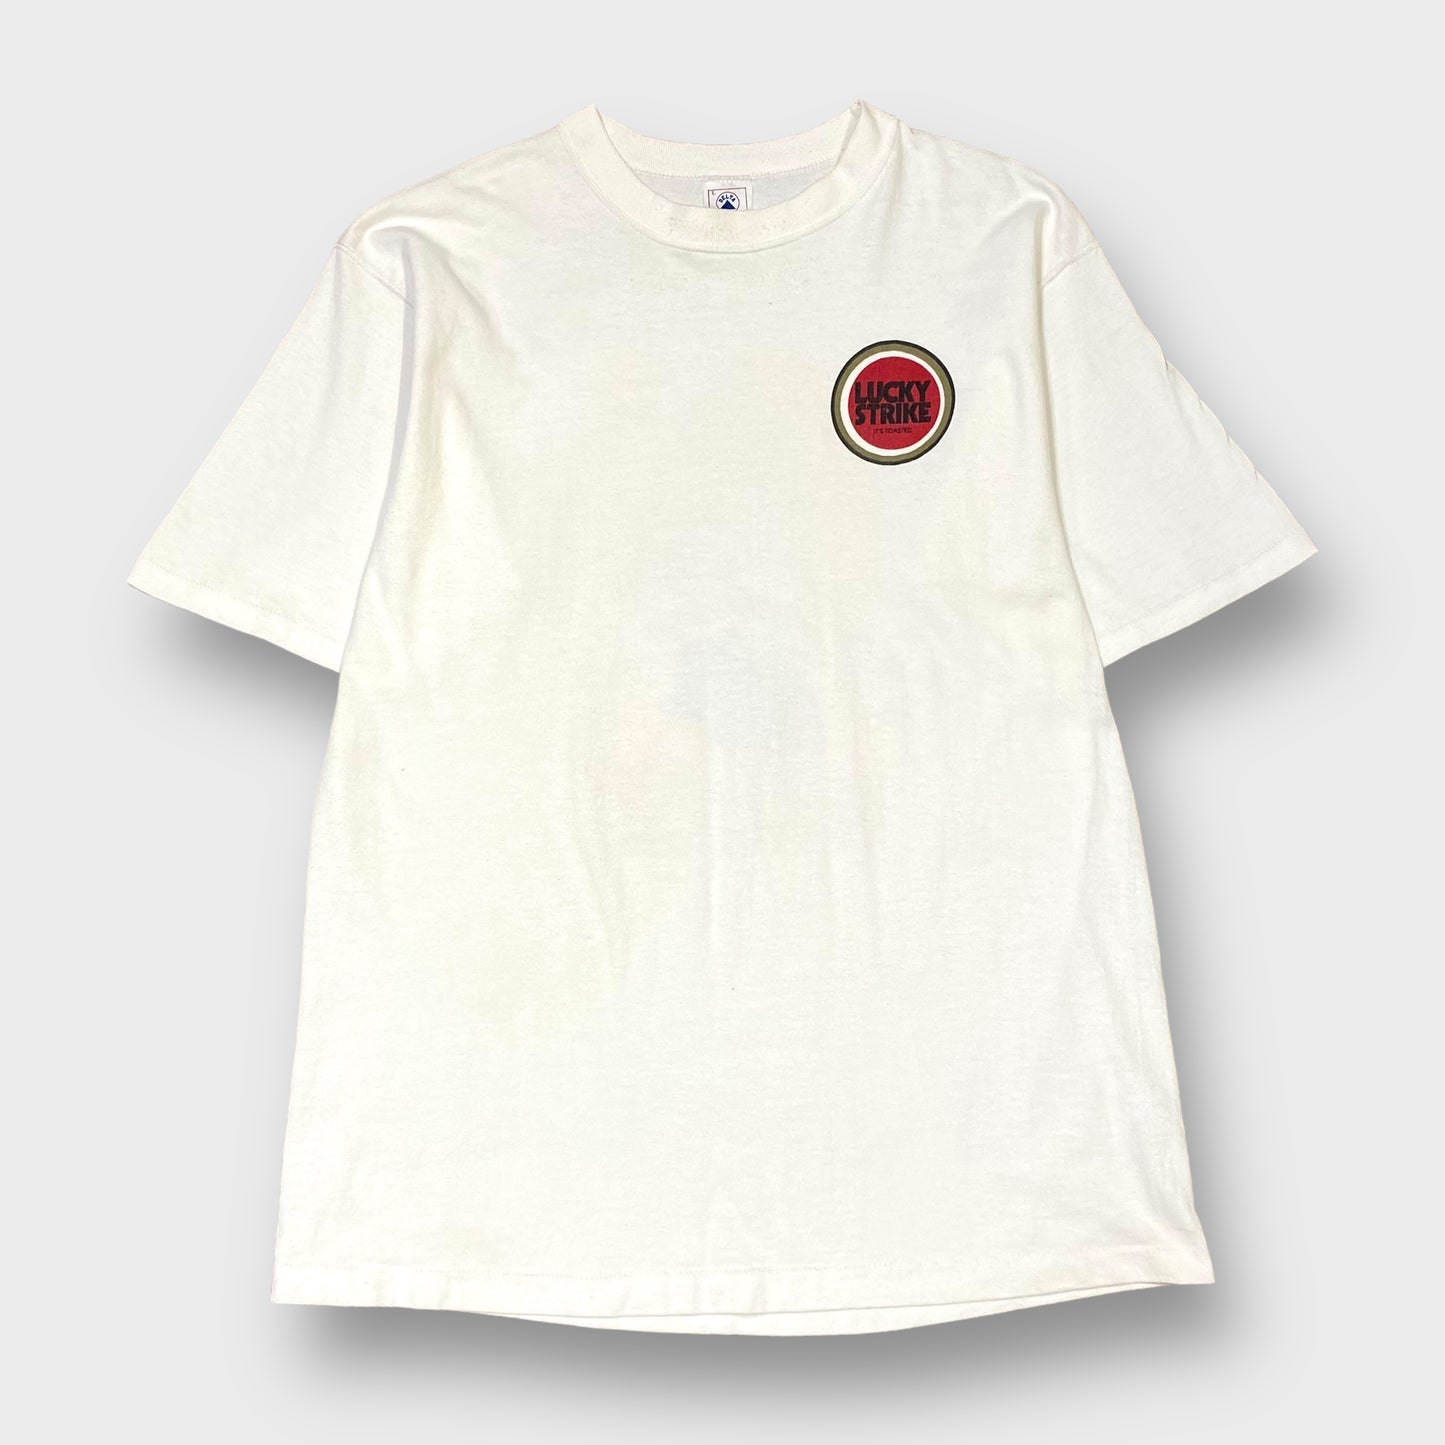 90's "LUCKY STRIKE" FIFA worldcup t-shirt